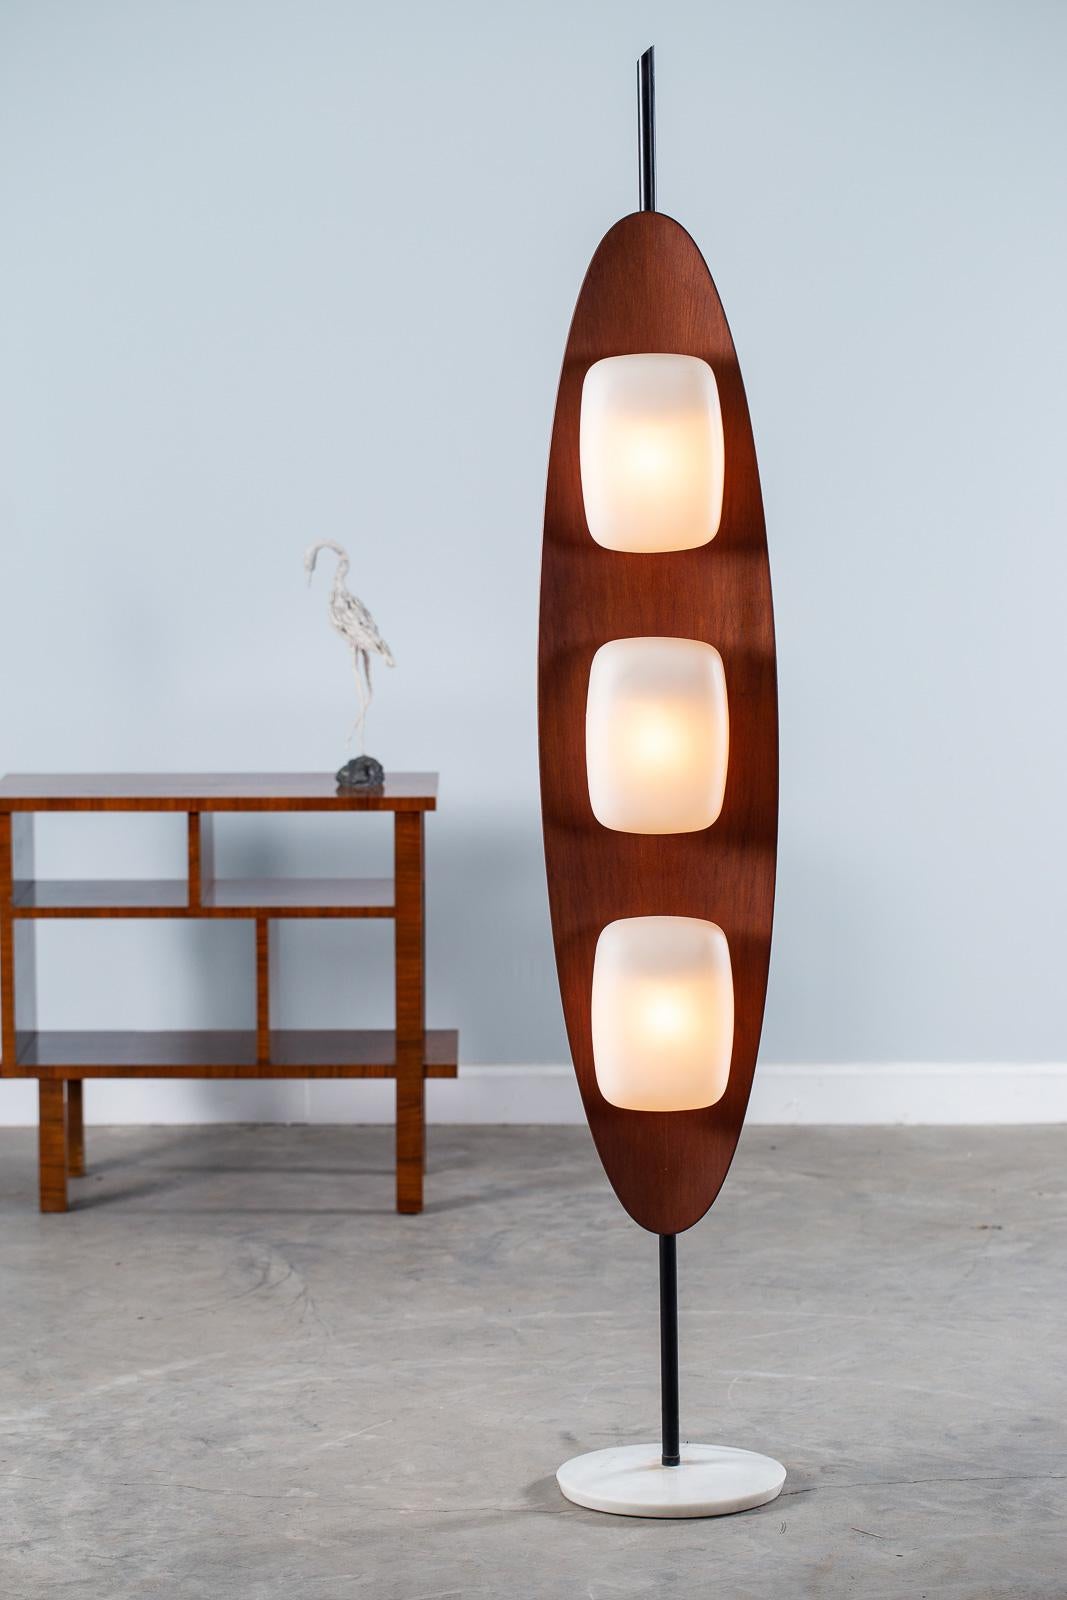 A cool vintage Italian teak wood surfboard floor lamp by Goffredo Reggiani, circa 1970. This rare Reggiani lamp showcases the international fascination with California surf culture that swept the world beginning in the 1960s. The circular solid